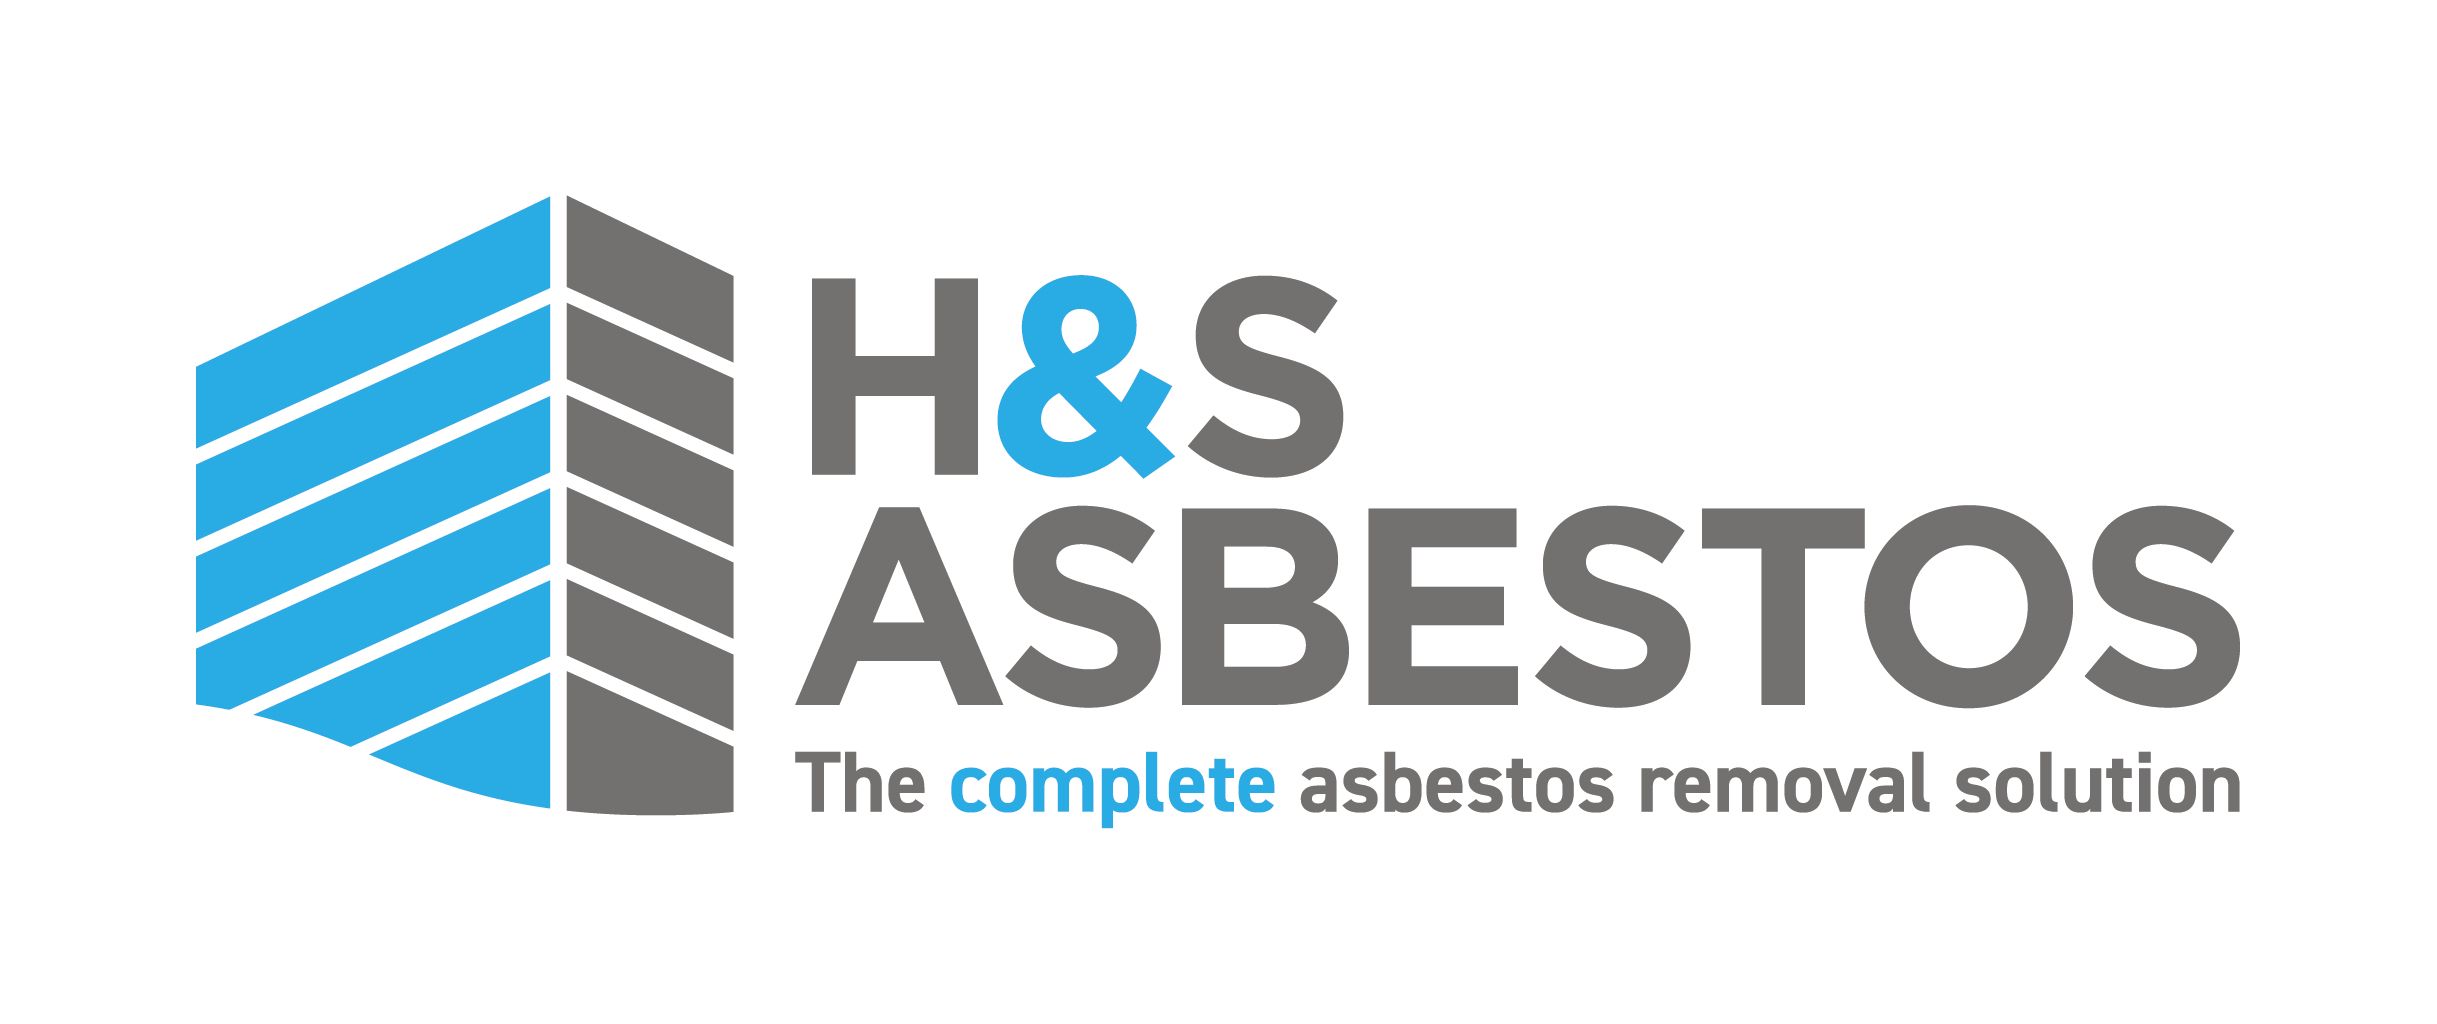 Launch of Asbestos Removal division